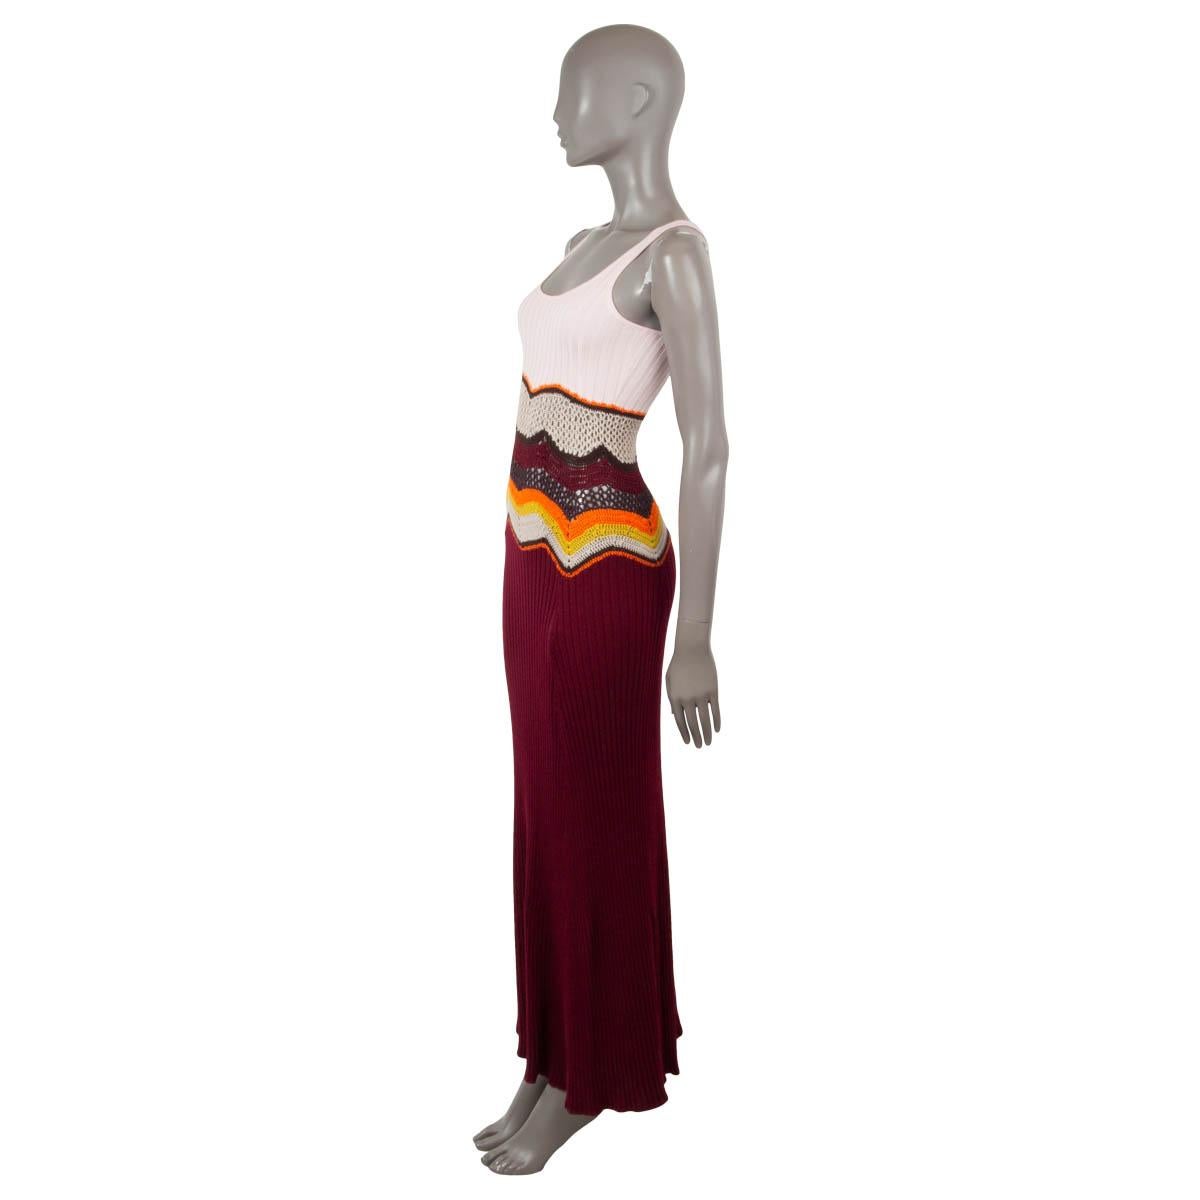 100% authentic Gabriela Hearst Sainz ribbed-knitted maxi dress displays a pattern from Gabriela Hearst's hand-drawn illustrations. Made from cashmere (70%) and silk (30%) with vibrant crochet detailing at the waist. Has been worn and is in excellent